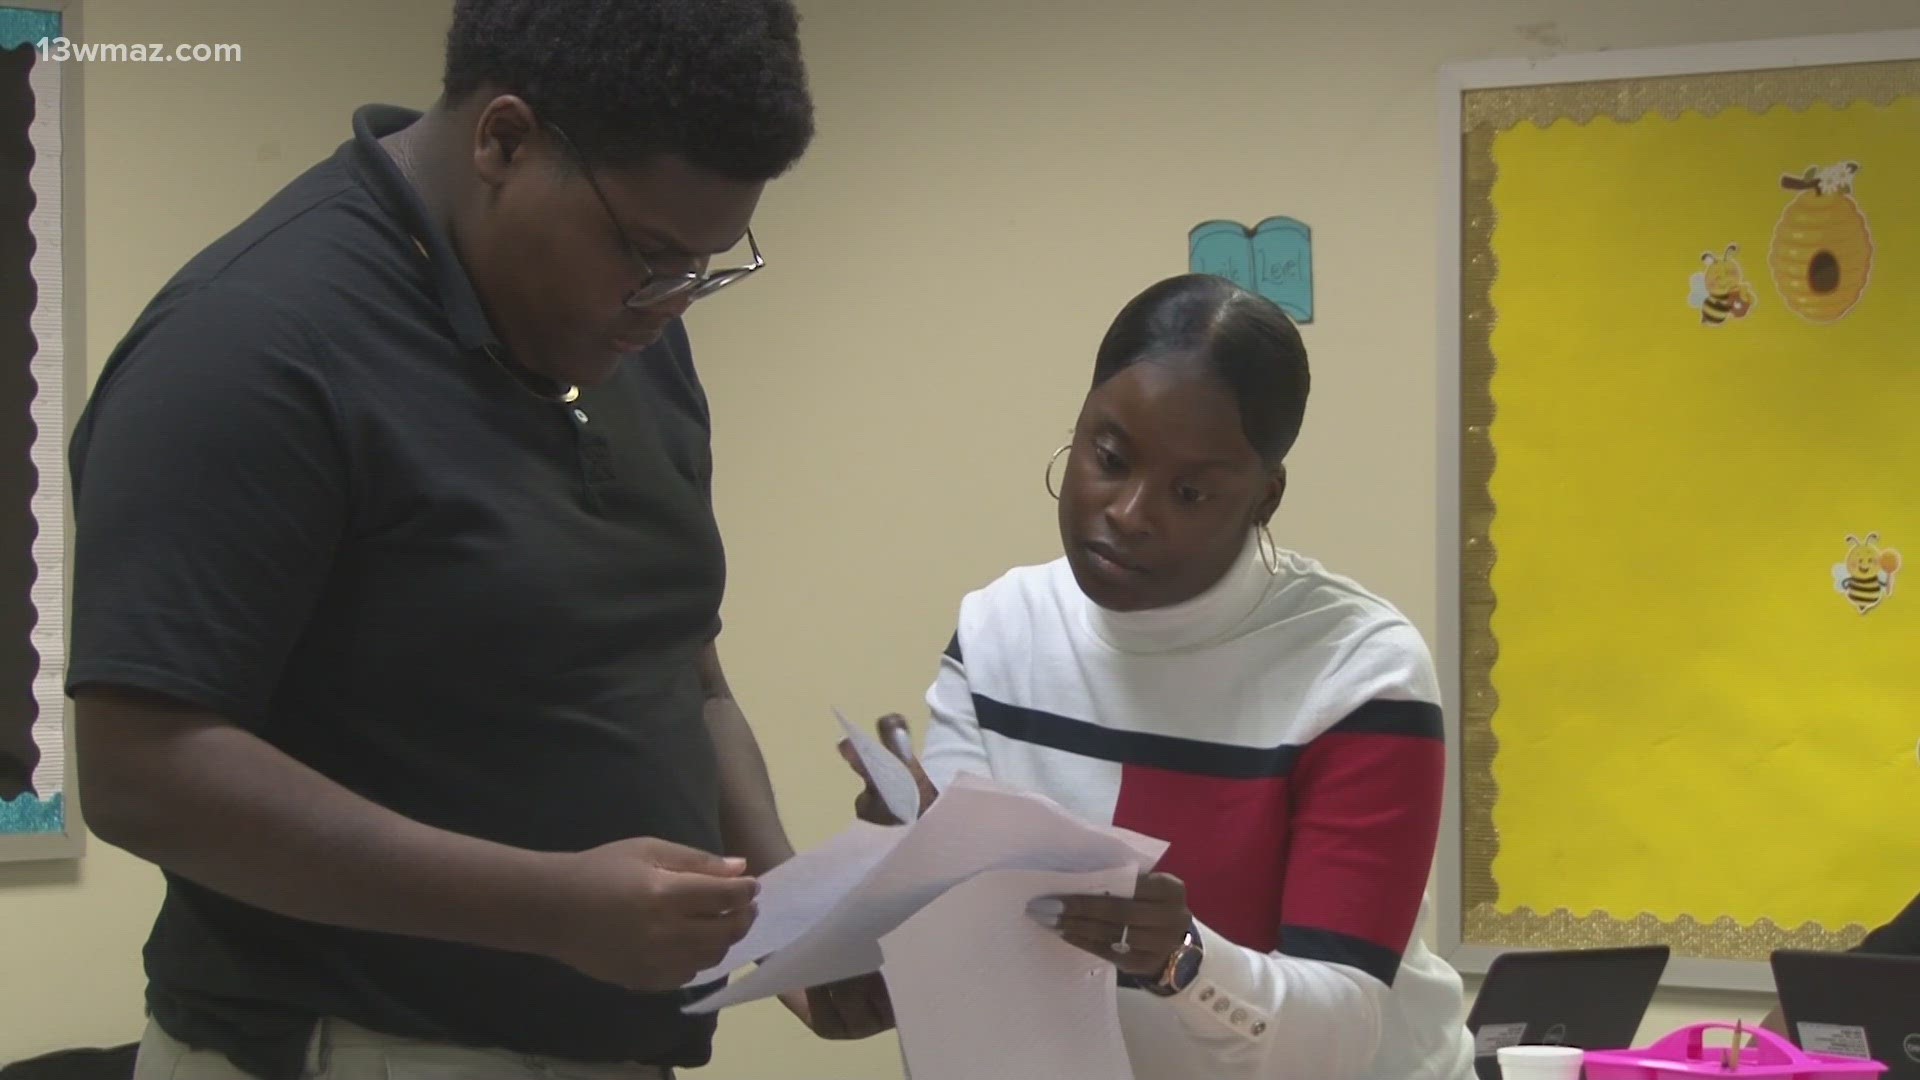 SOAR Academy aims to help Bibb students achieve goals like getting their high school diploma and  workforce certification.